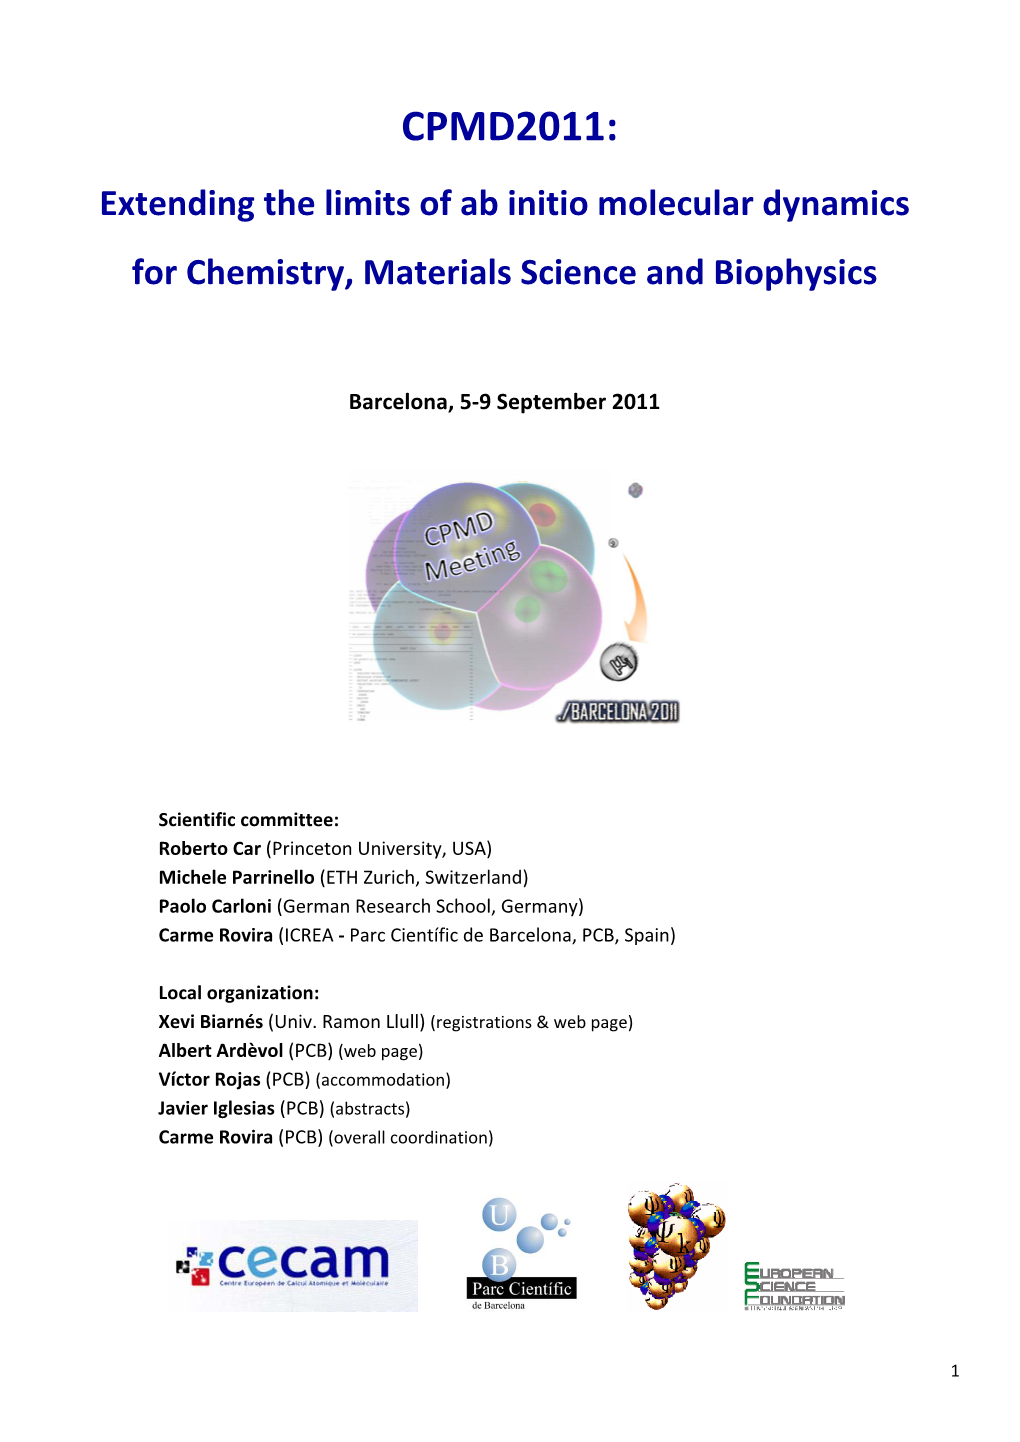 CPMD2011: Extending the Limits of Ab Initio Molecular Dynamics for Chemistry, Materials Science and Biophysics